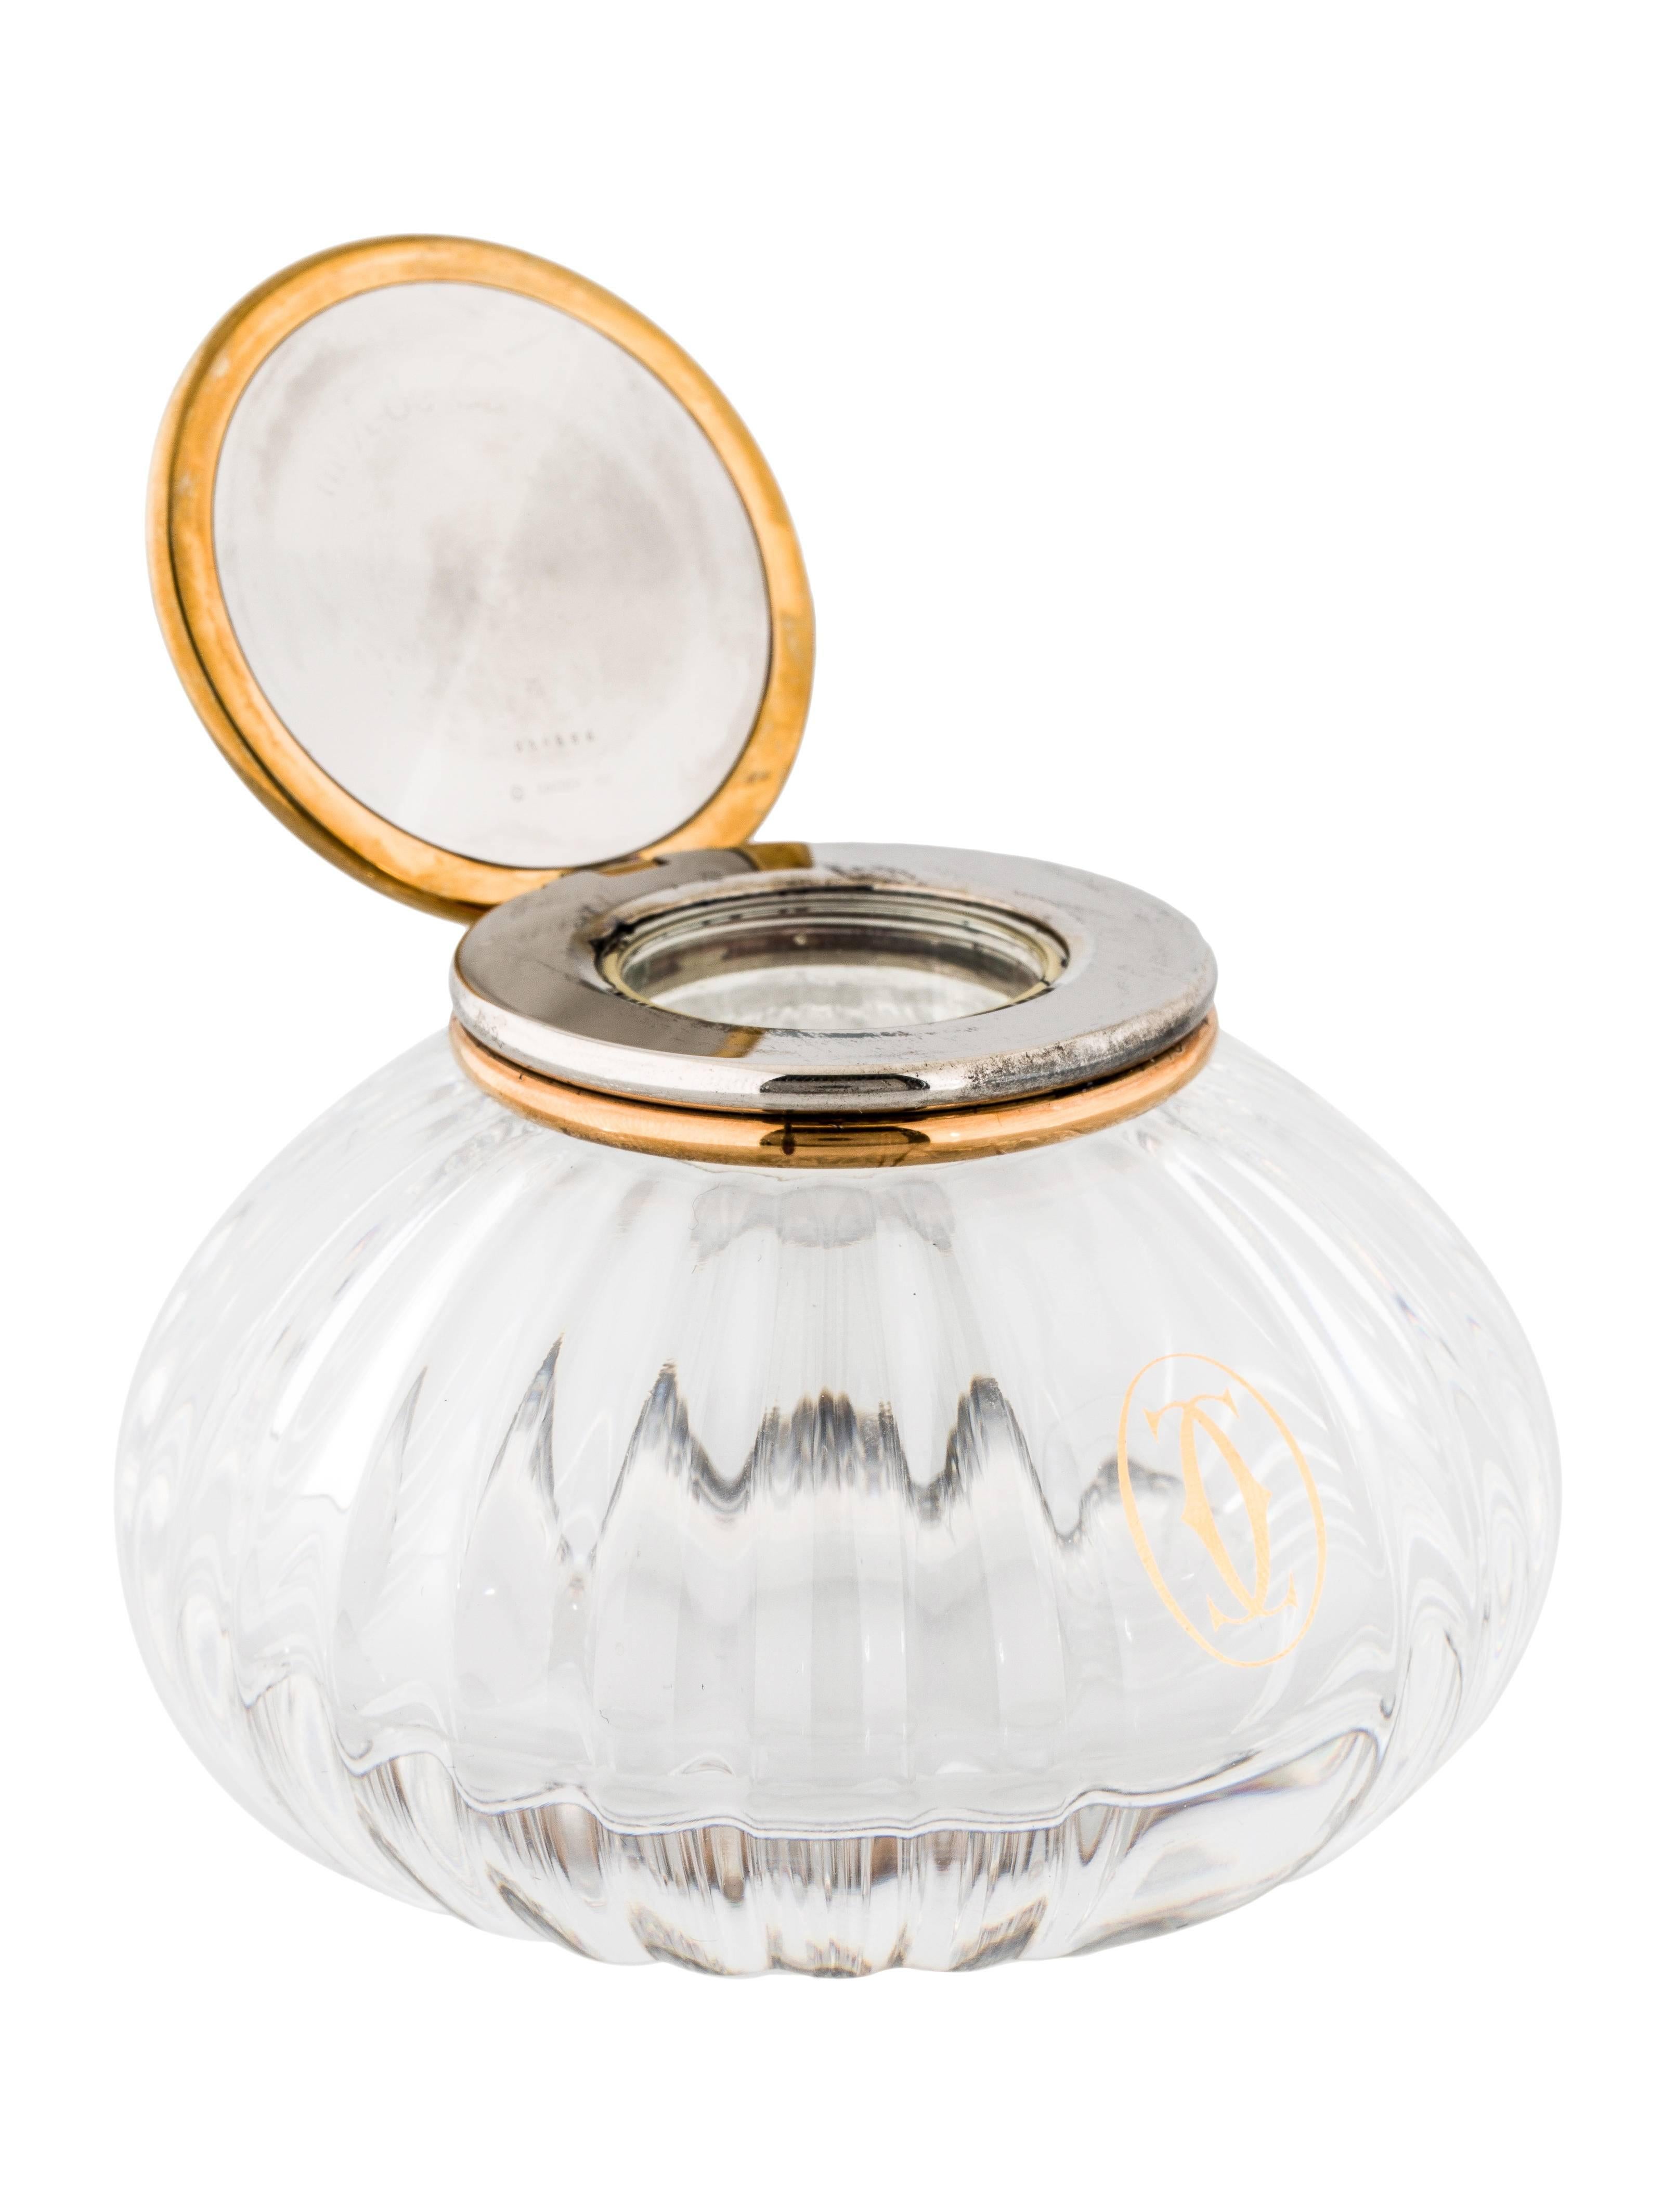 CURATOR'S NOTES

Crystal
Cabochon 
Silver and gold tone rim 
Hinge closure 
Height 2.5"
Diameter 3.25"
Includes box

Shop Newfound Luxury for authentic vintage Cartier home decor accessories.
